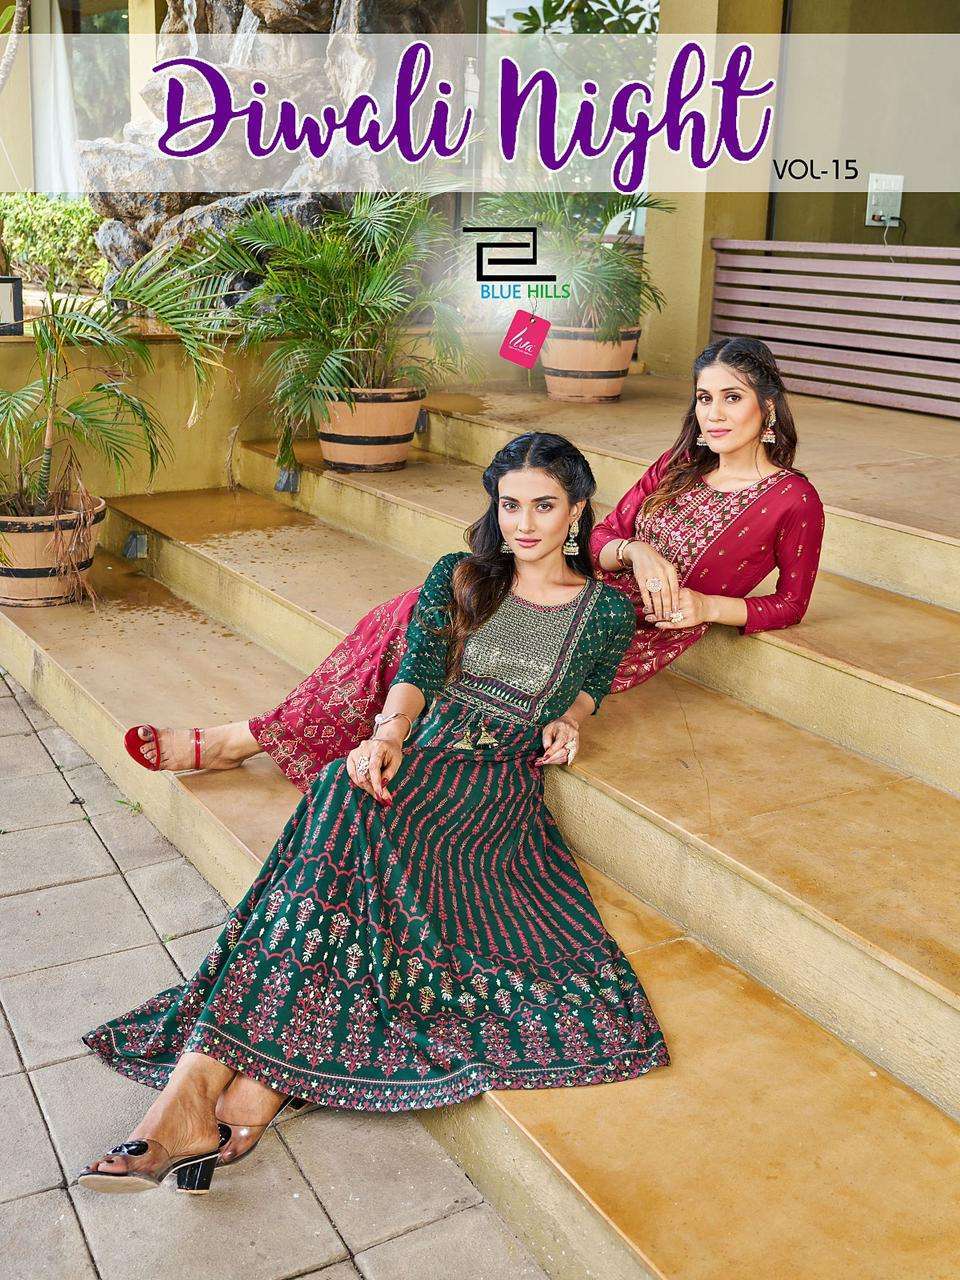 Diwali 2022: 10 Kurti Types You Can Experiment With To Ace Your Ethnic Look  - Boldsky.com